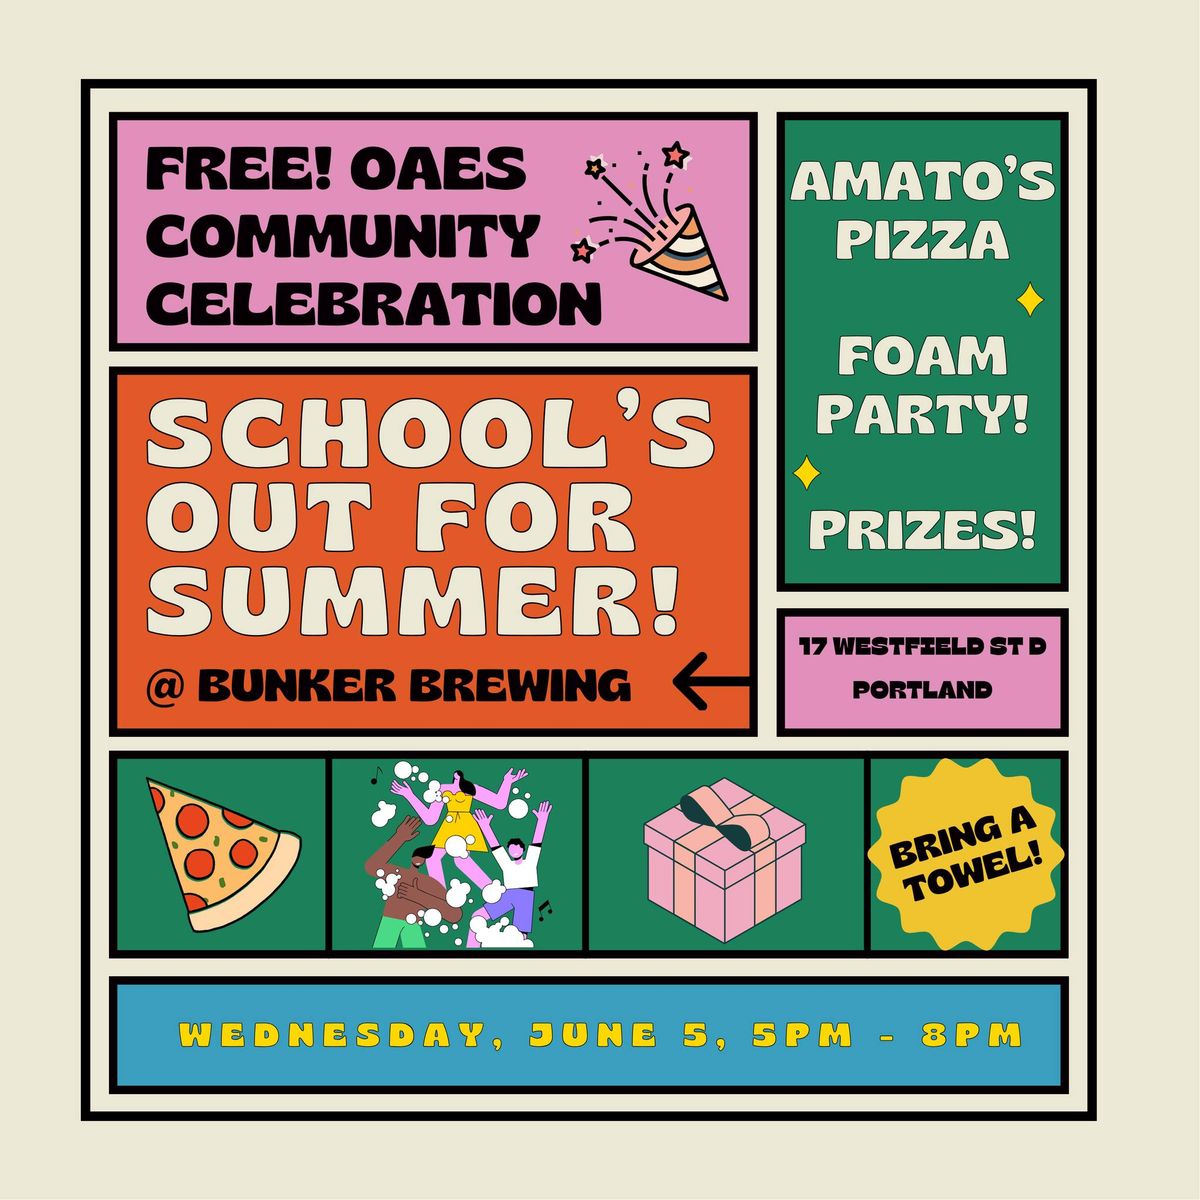 School's Out For Summer Celebration!